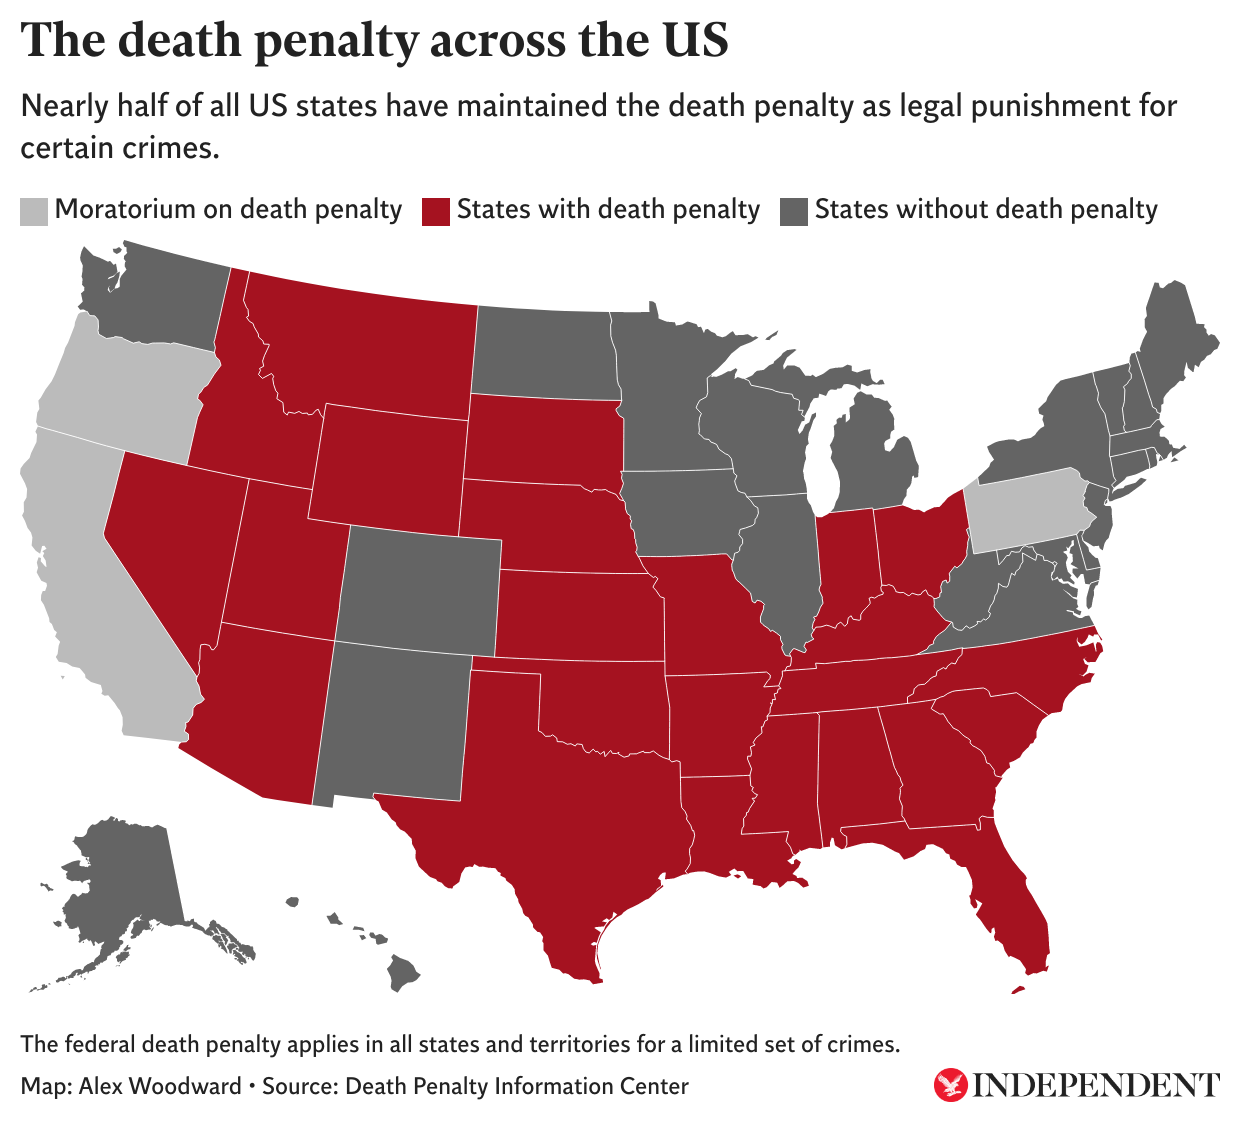 This map shows which US states still have the death penalty, and which have abolished or temporarily banned it